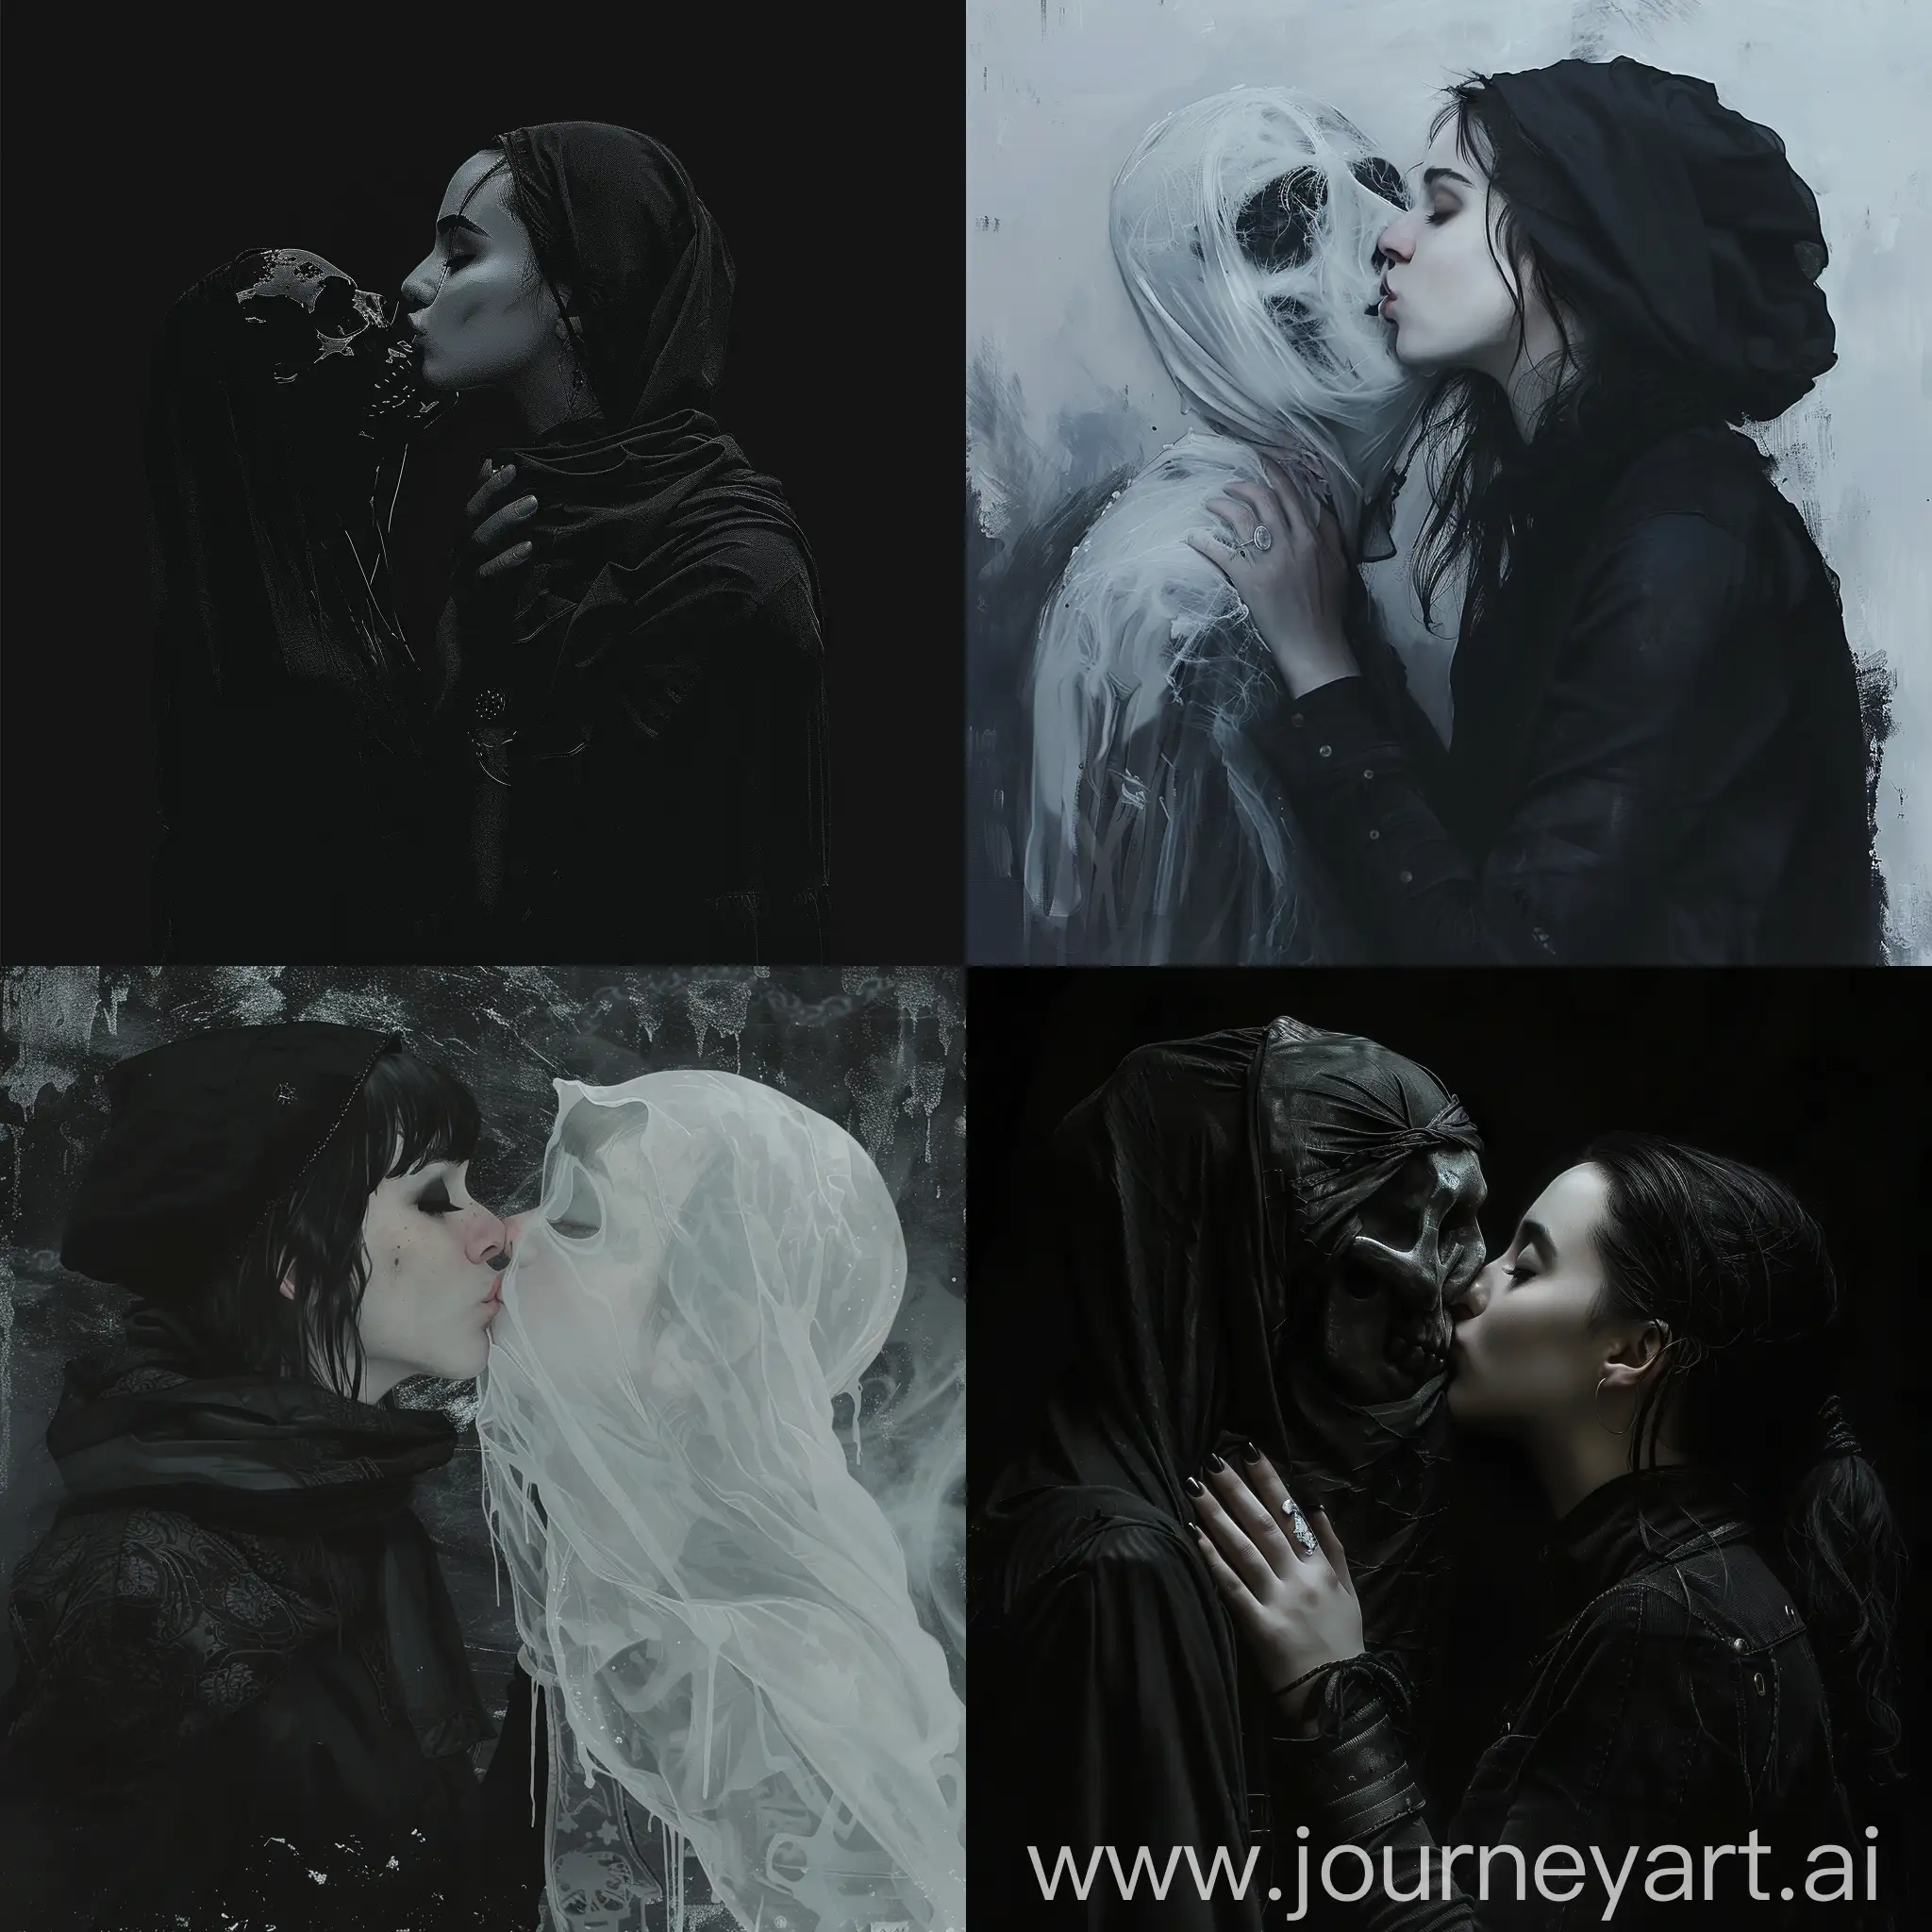 Mysterious-Embrace-Enigmatic-Girl-in-Black-Clothing-Kissing-a-Ghost